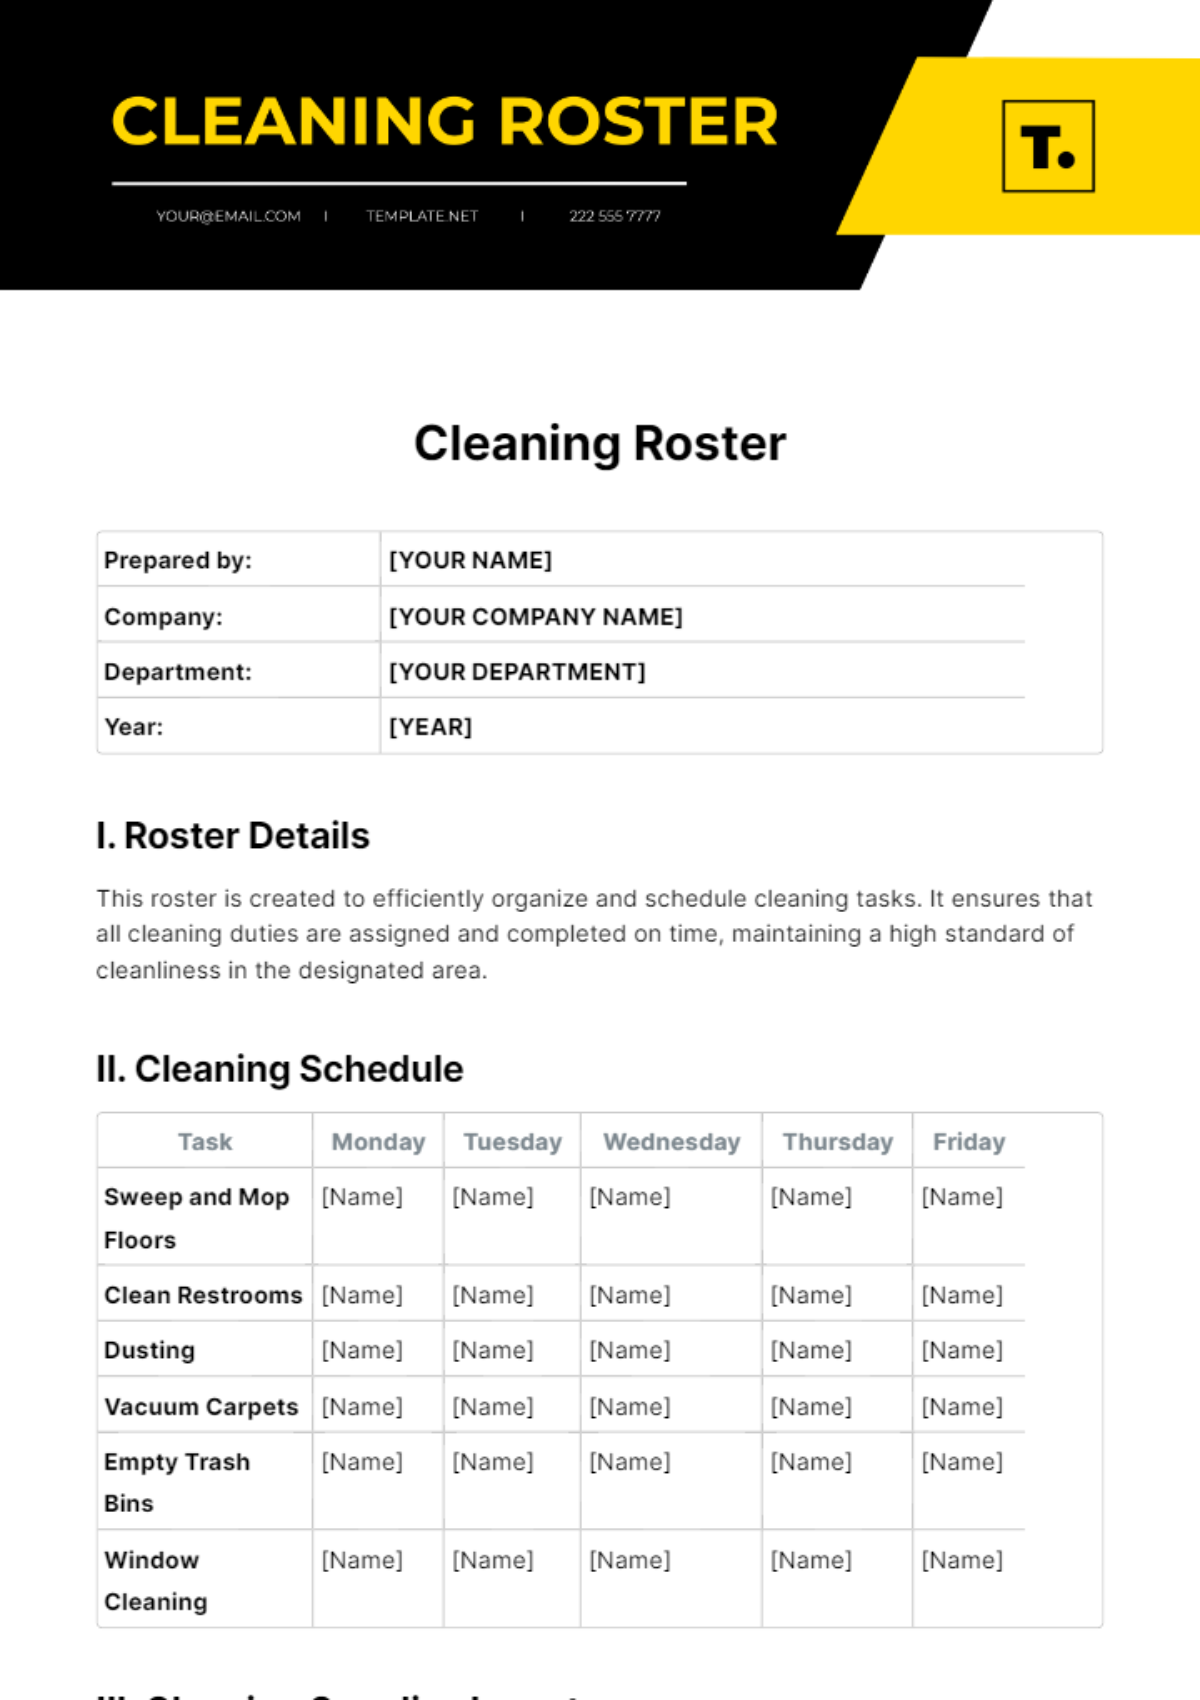 Cleaning Roster Template